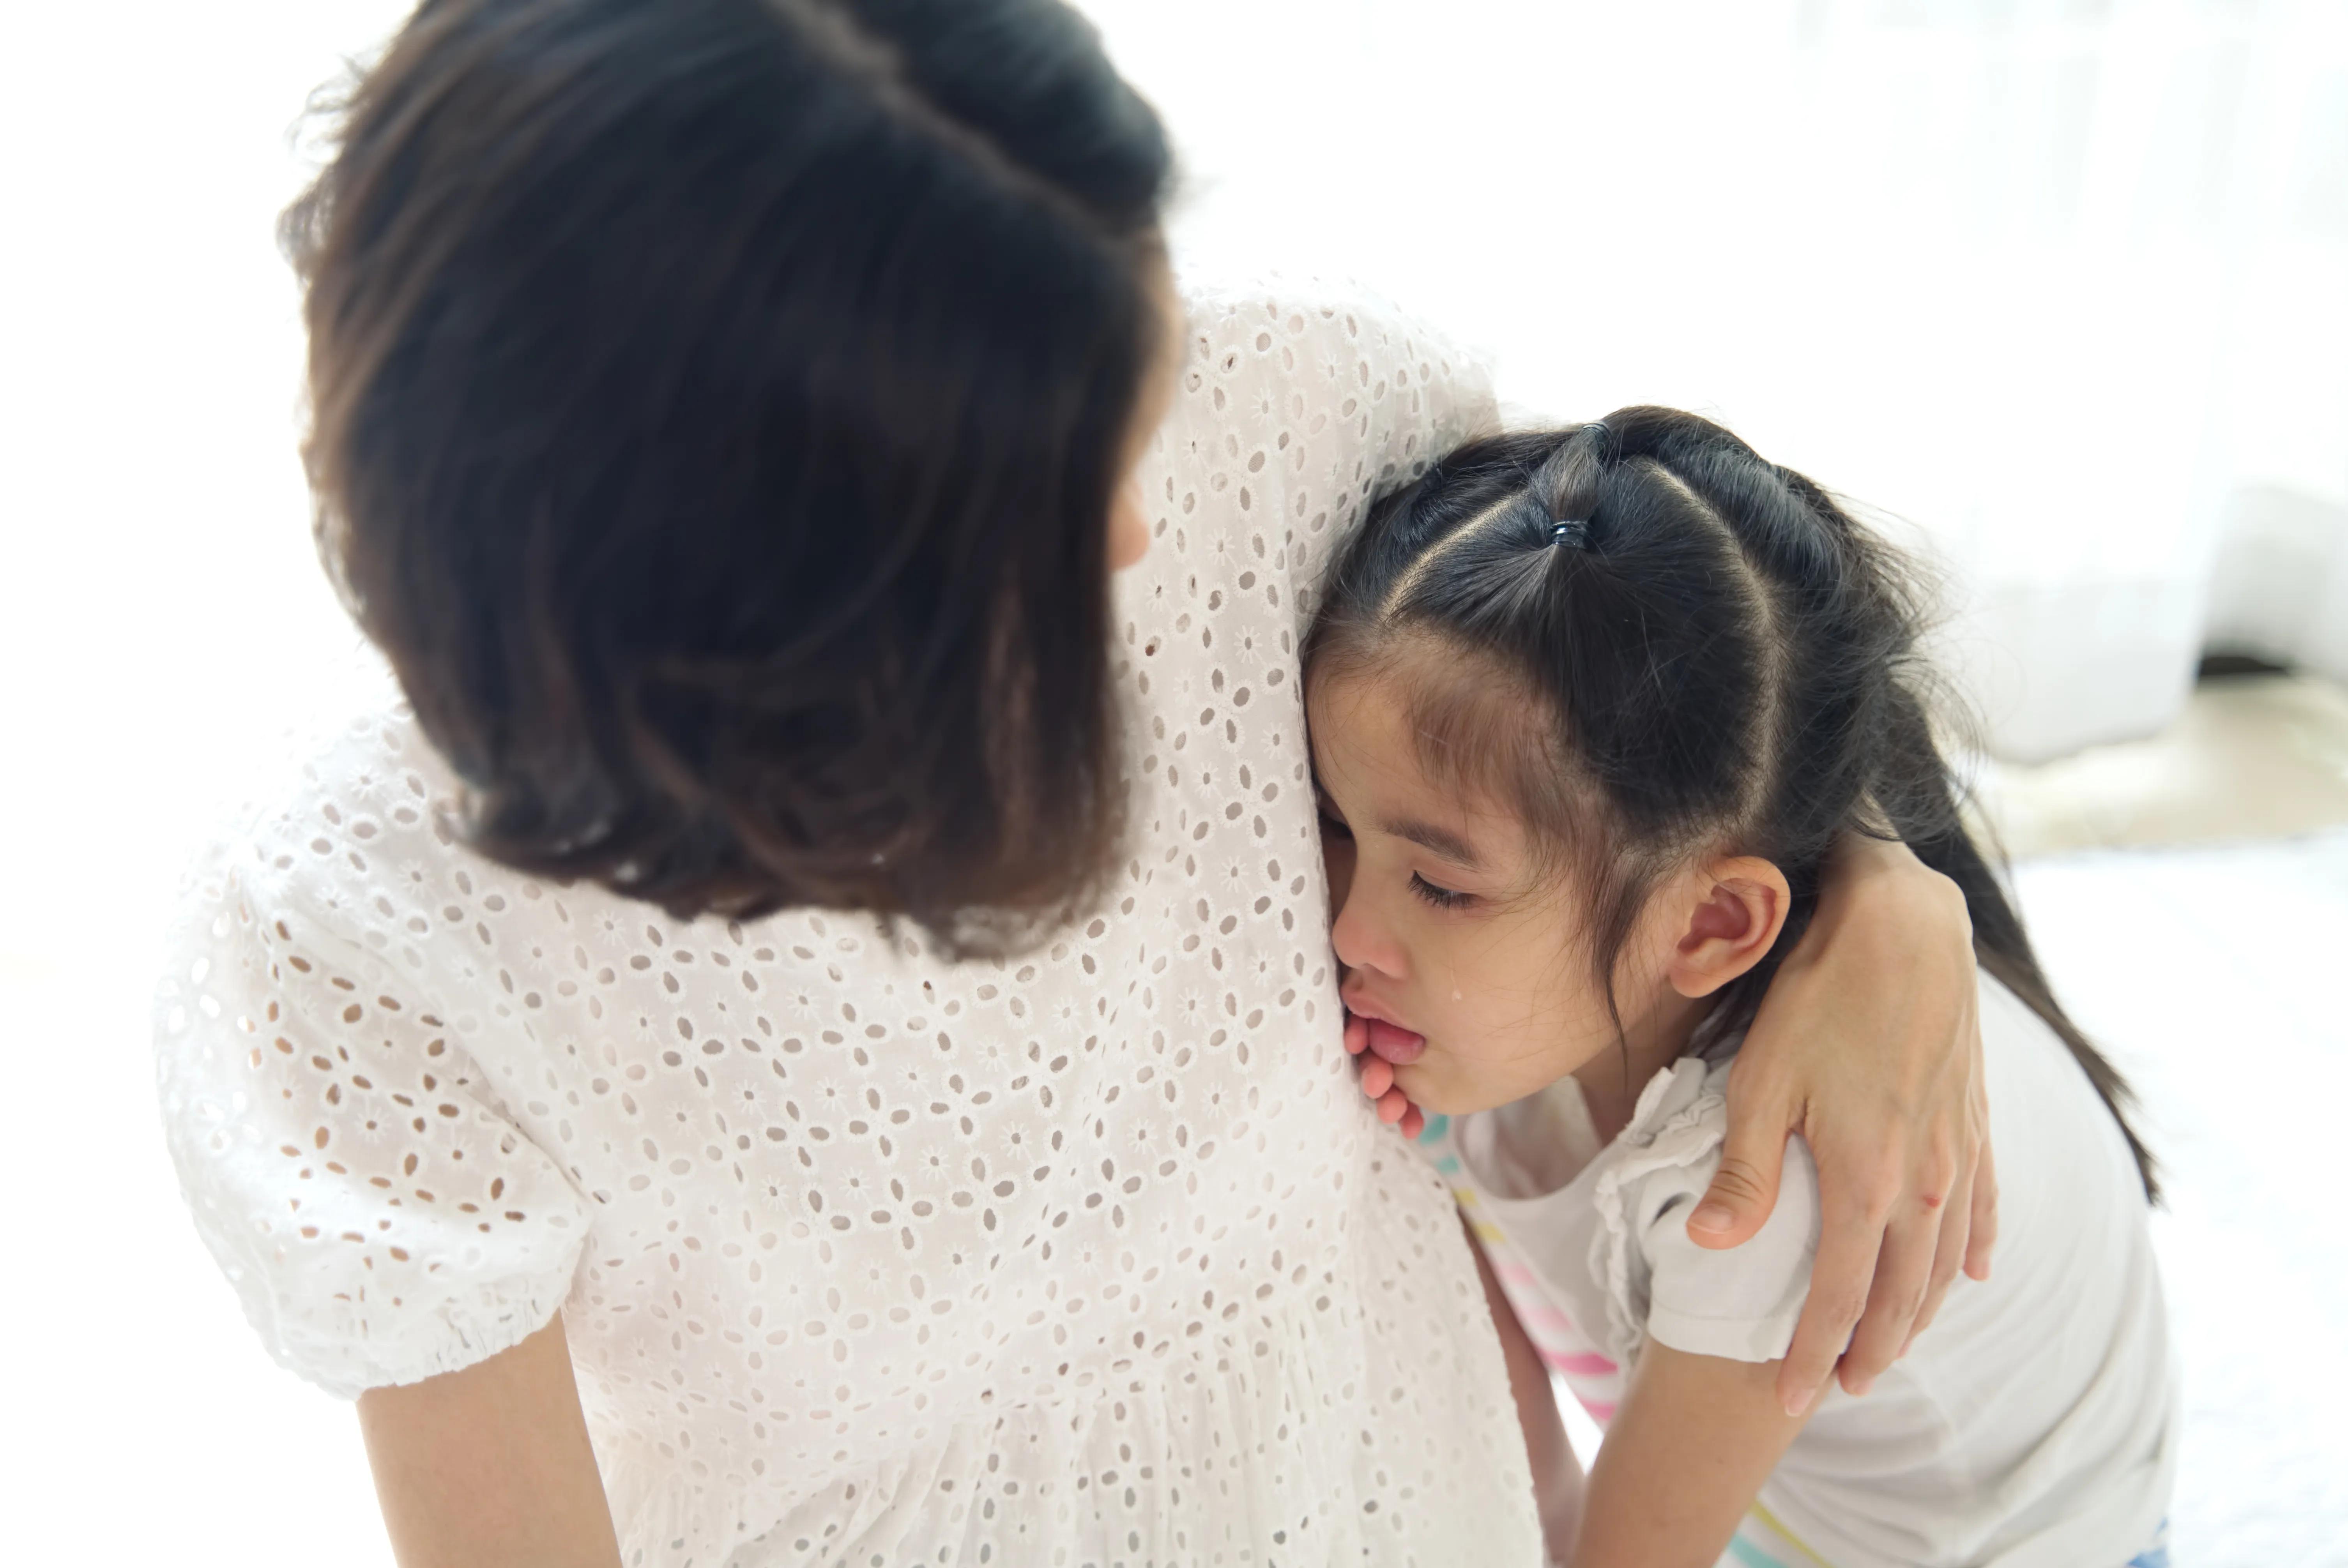 Parenting with unconditional love: What it means and why it matters